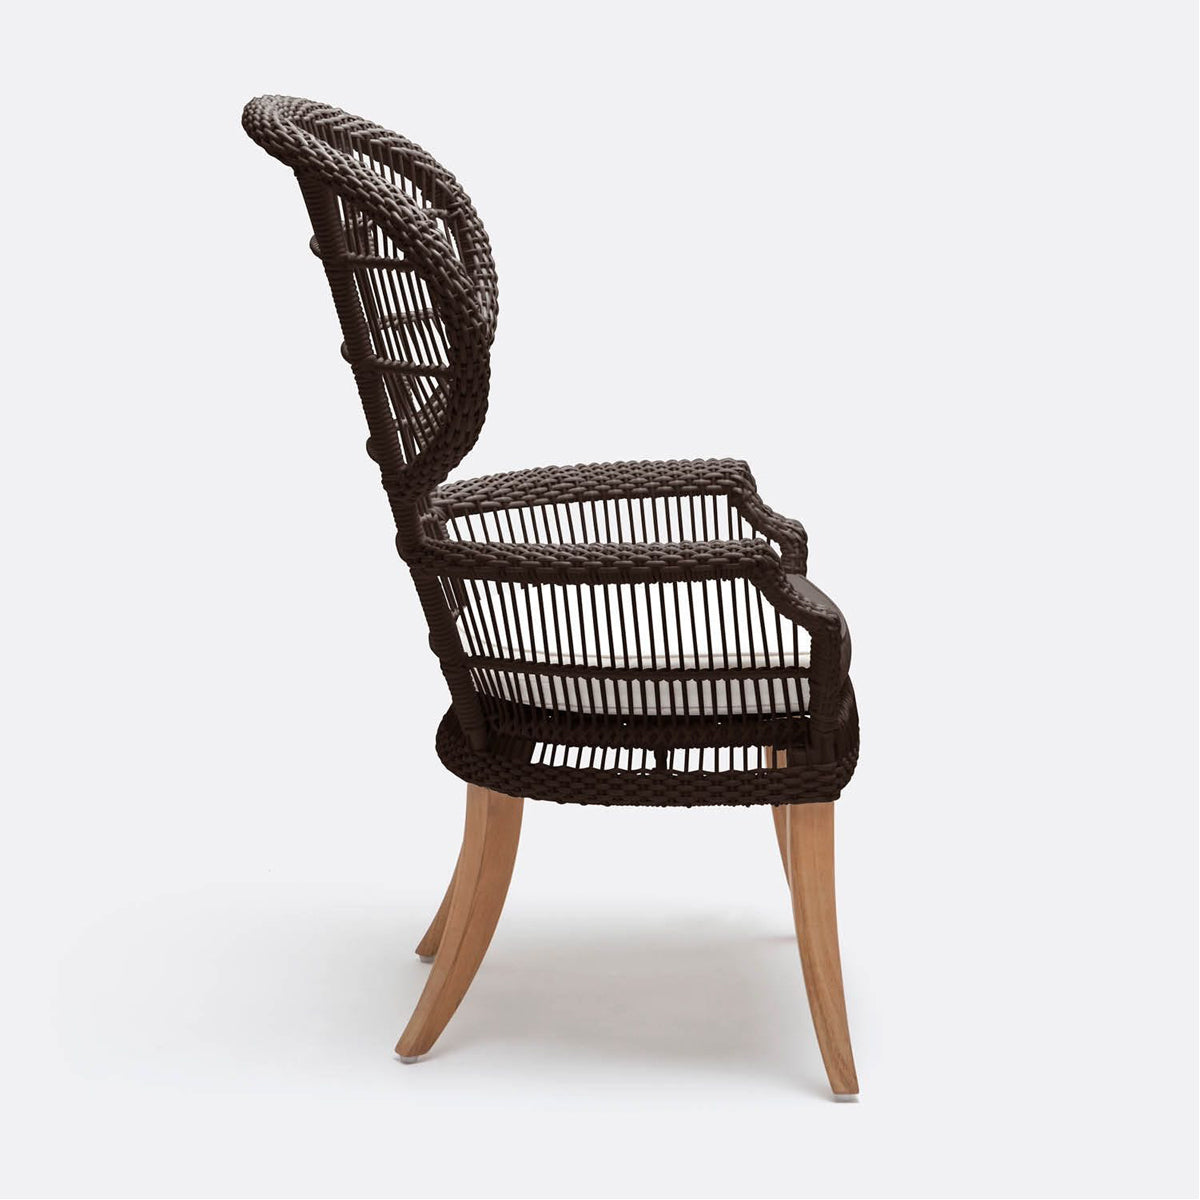 Made Goods Aurora Woven Wingback Outdoor Dining Chair in Liard Cotton Velvet